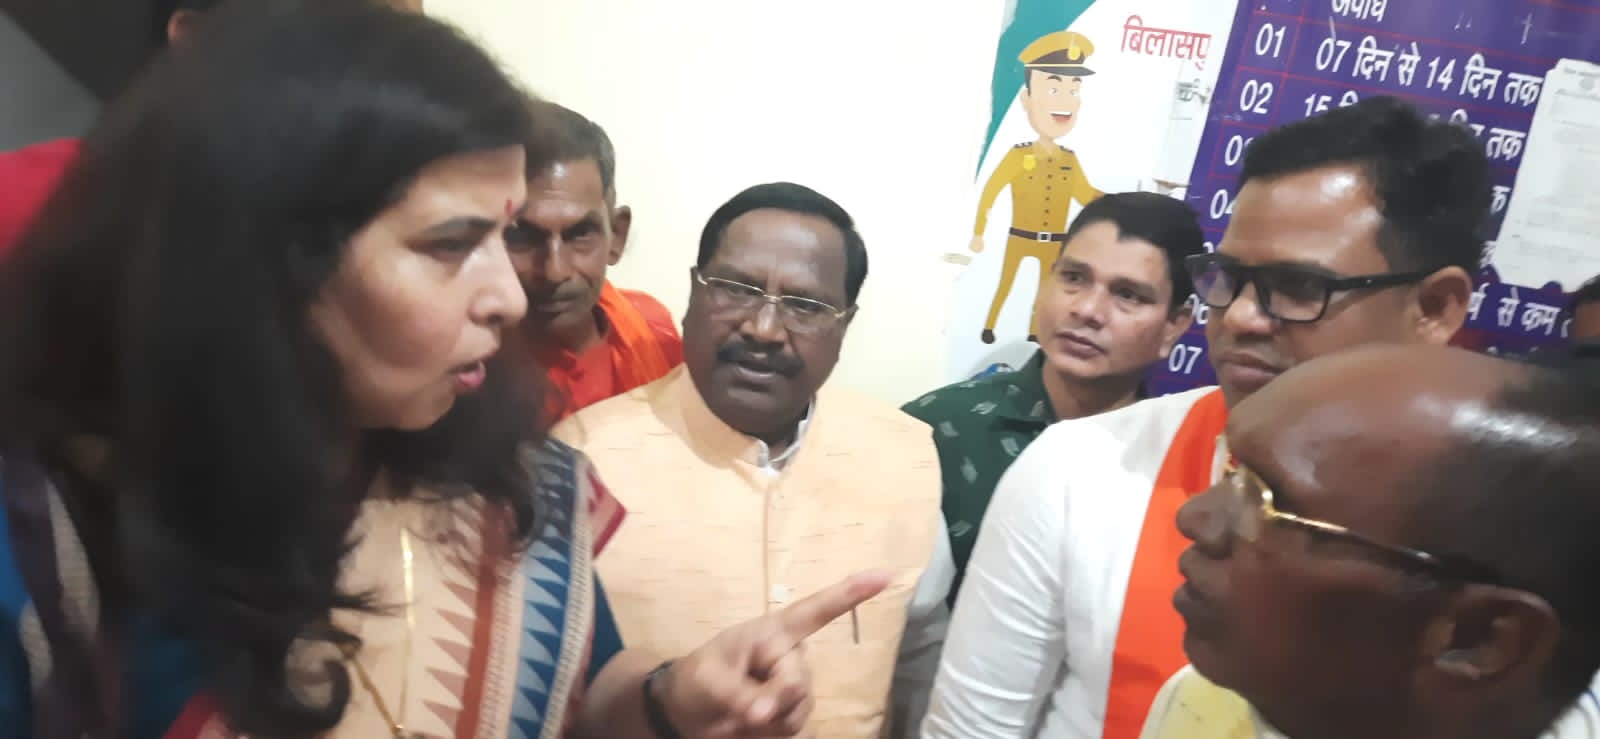 Saroj Pandey reached to listen to the problems